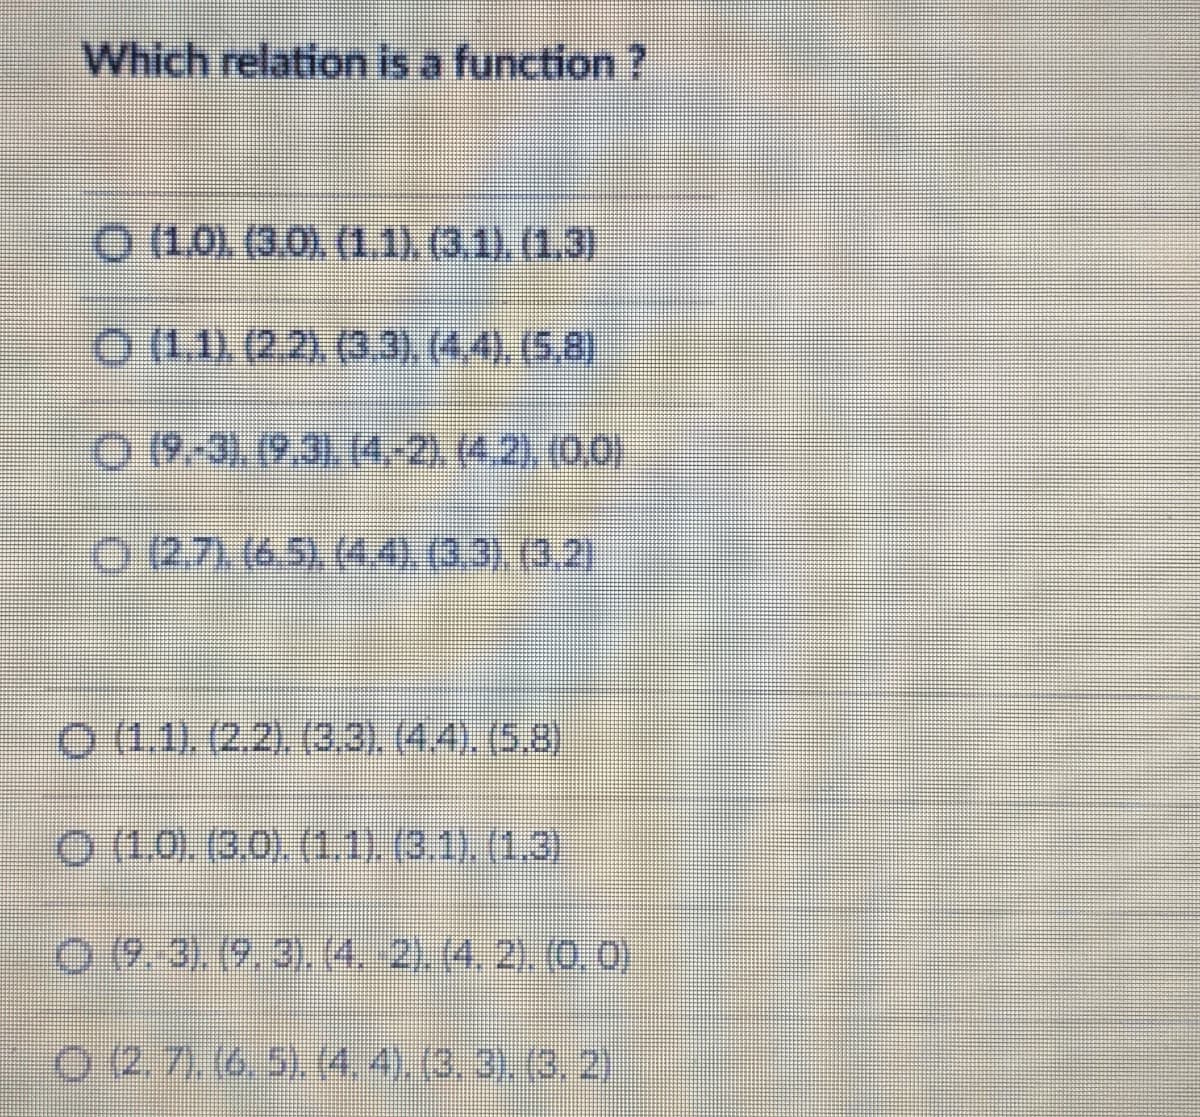 Which relation is a function ?
O (1.0). (3.0) (1.1) (3.1).(1.3)
O (1.1) (2.2), (3.3), (4.4), (5,8)
O 19-3). (9.31. (4-2.(4.2) (0.0)
0271(65,(4003).(3,2)
O (1.1). (2.2). (3.3). (4.4). (5,8)
0 (1.0. (30) (1,1). (3.1) (1.3)
0 9.3) (9.3).(4. 2). (4, 2) 0.0)
0 2.7).(6.5).4.4).(3,3). (3, 2)
